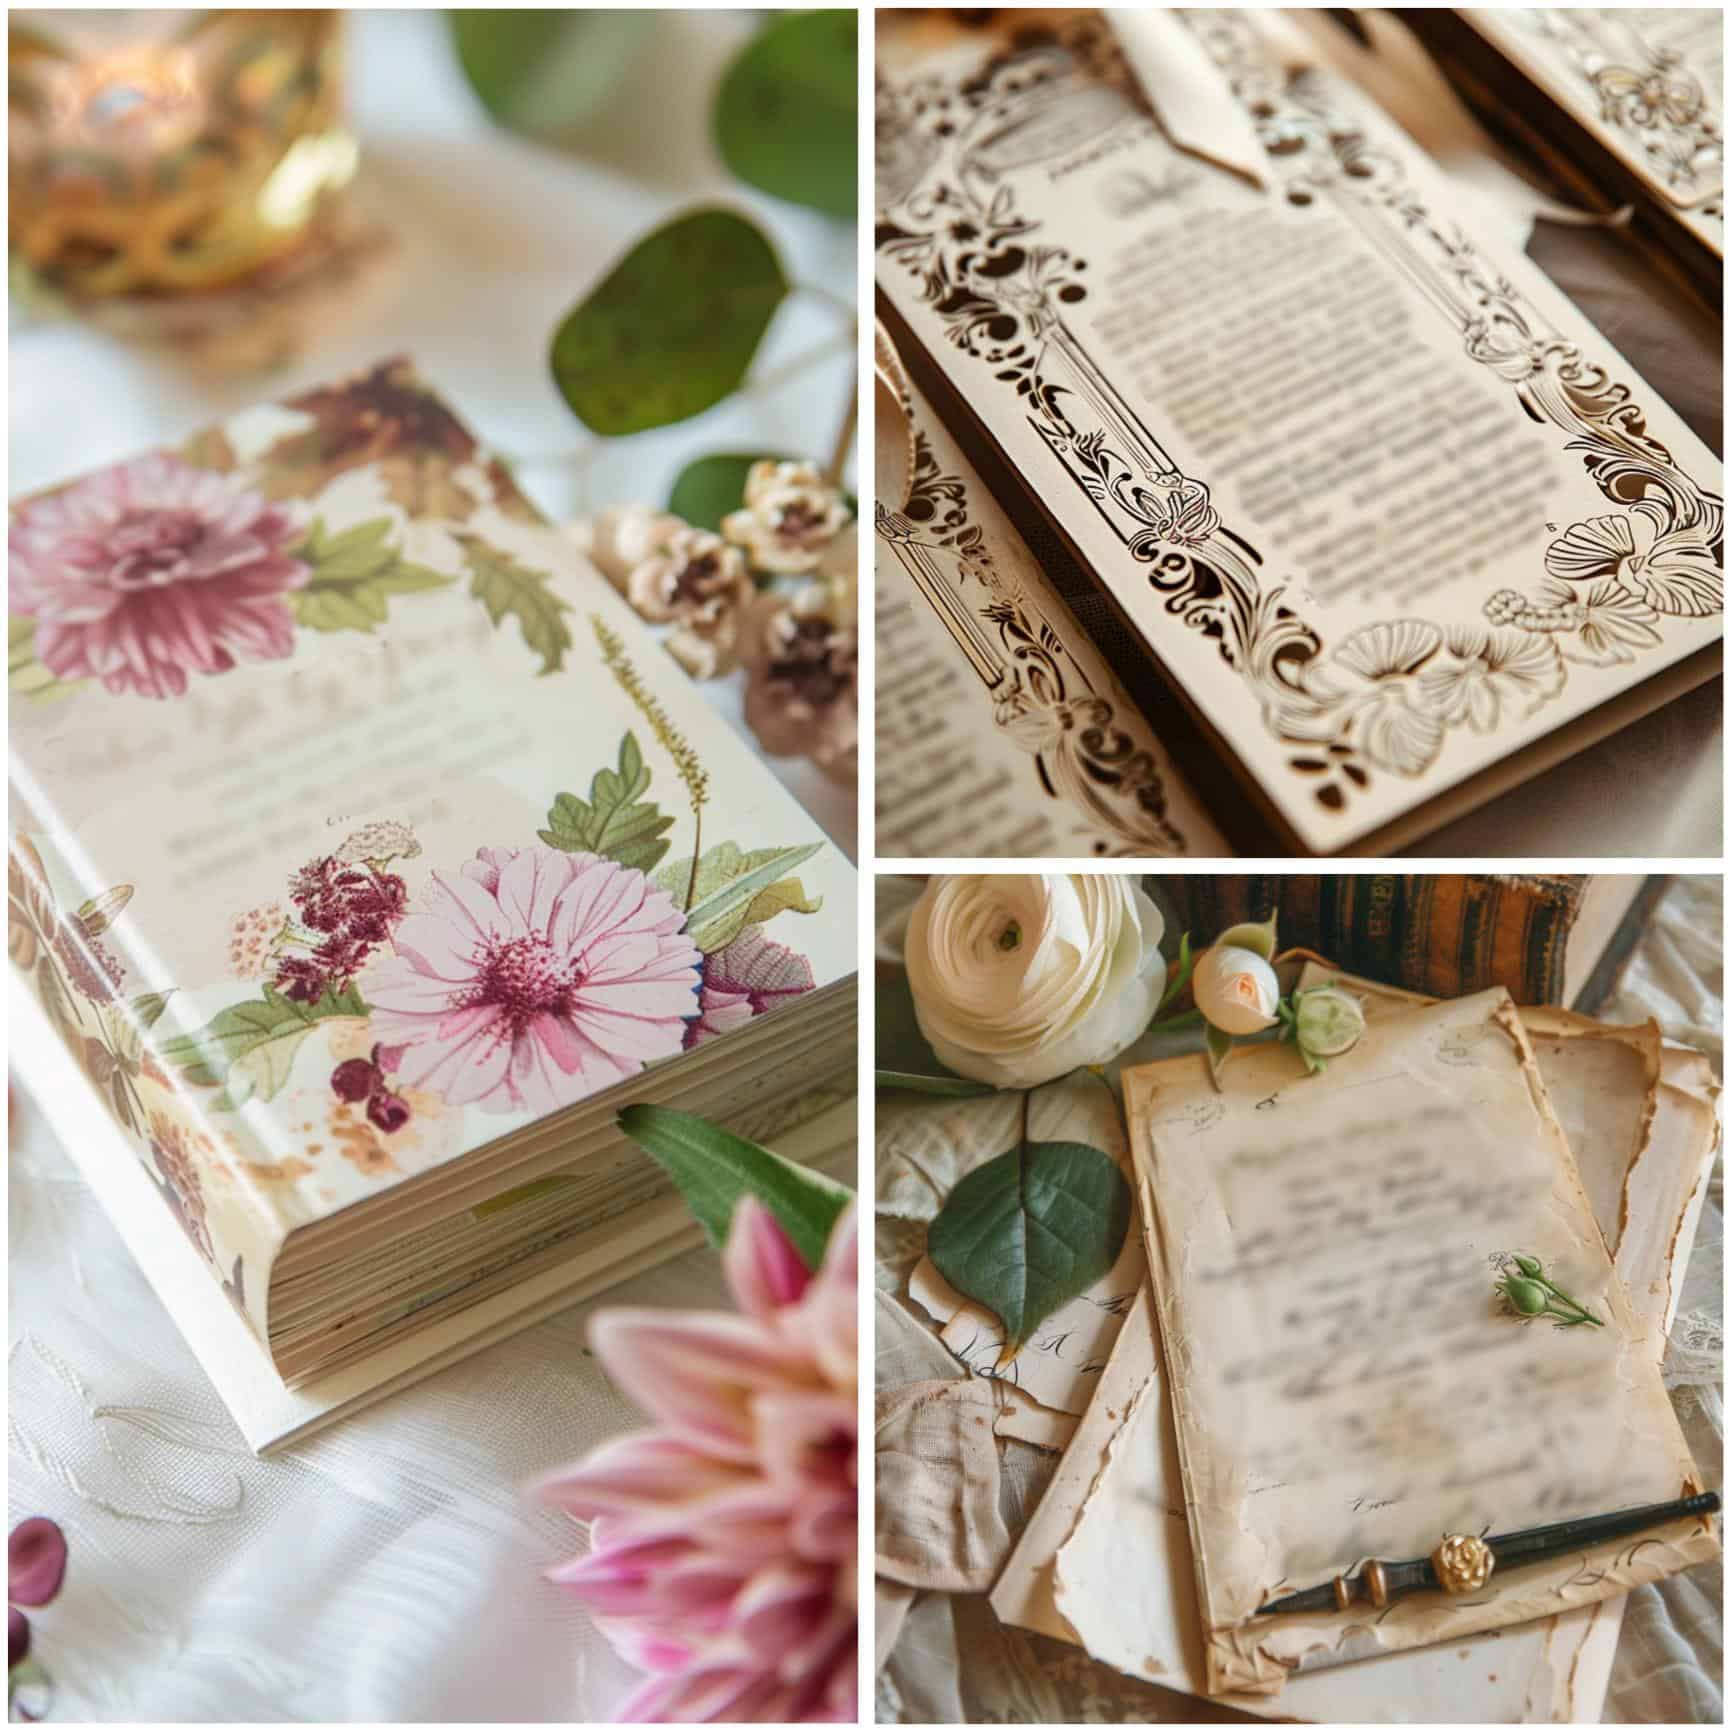 book wedding theme ideas for stationery